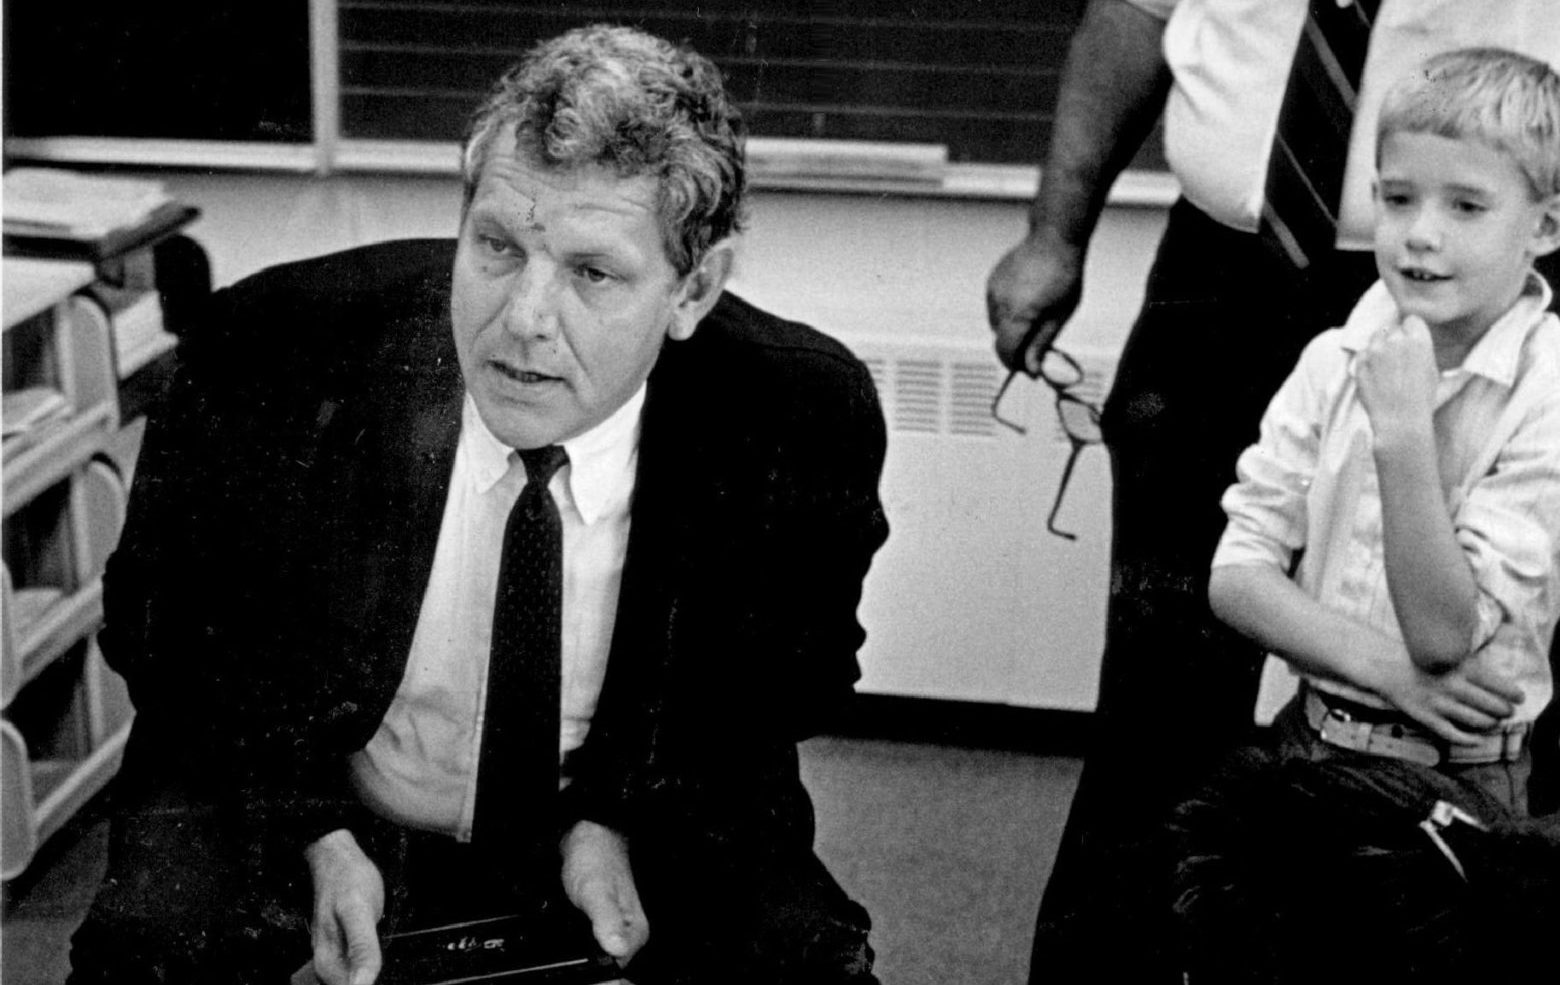 8/31/1987, SEP 1 1987; Secretary of Education William Bennett speaks to a groups of students at Mont